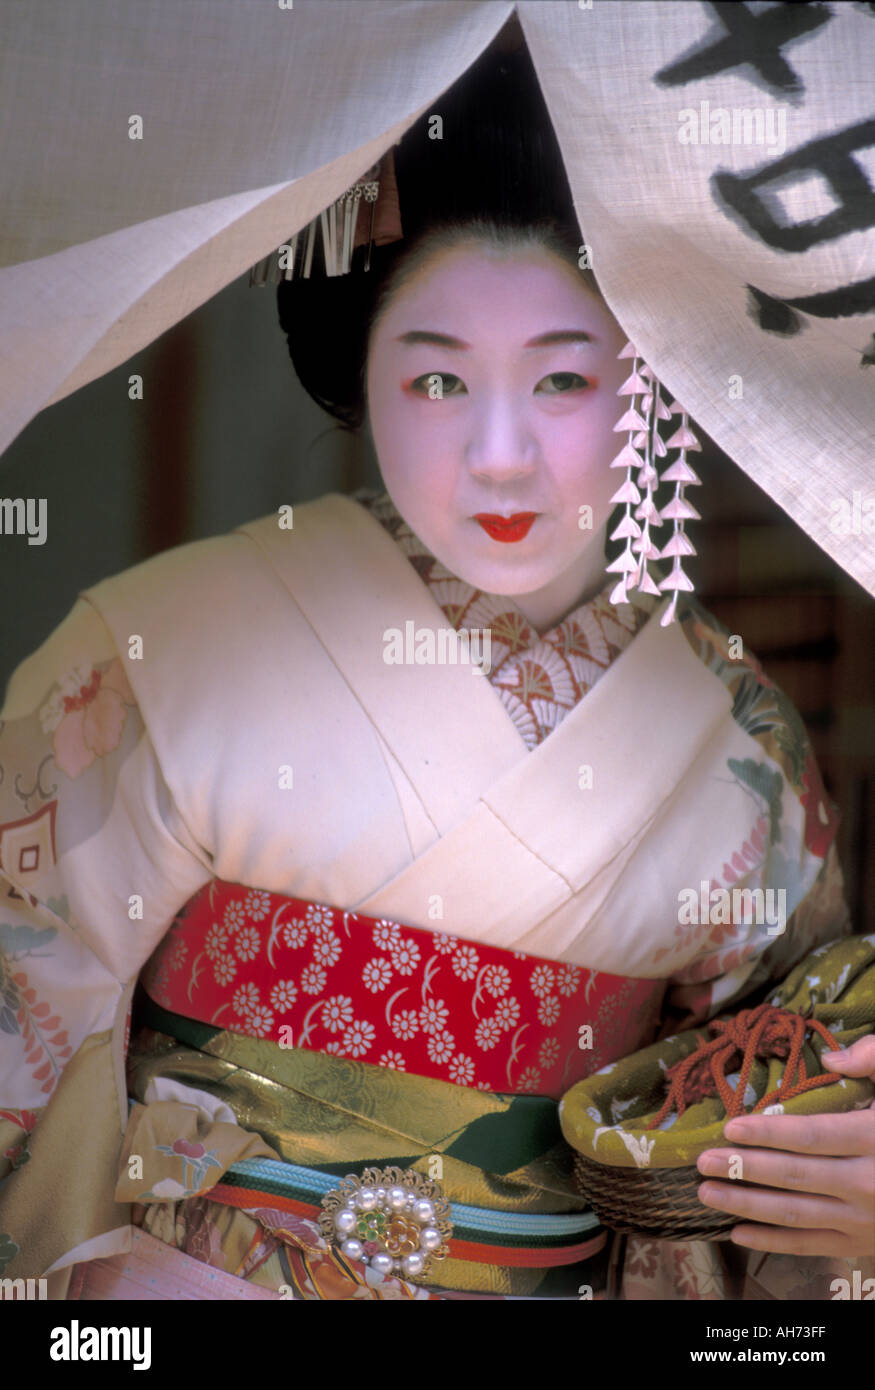 A tourist dressed as a maiko, or geisha in training, posing at a doorway curtain on her way outside Stock Photo